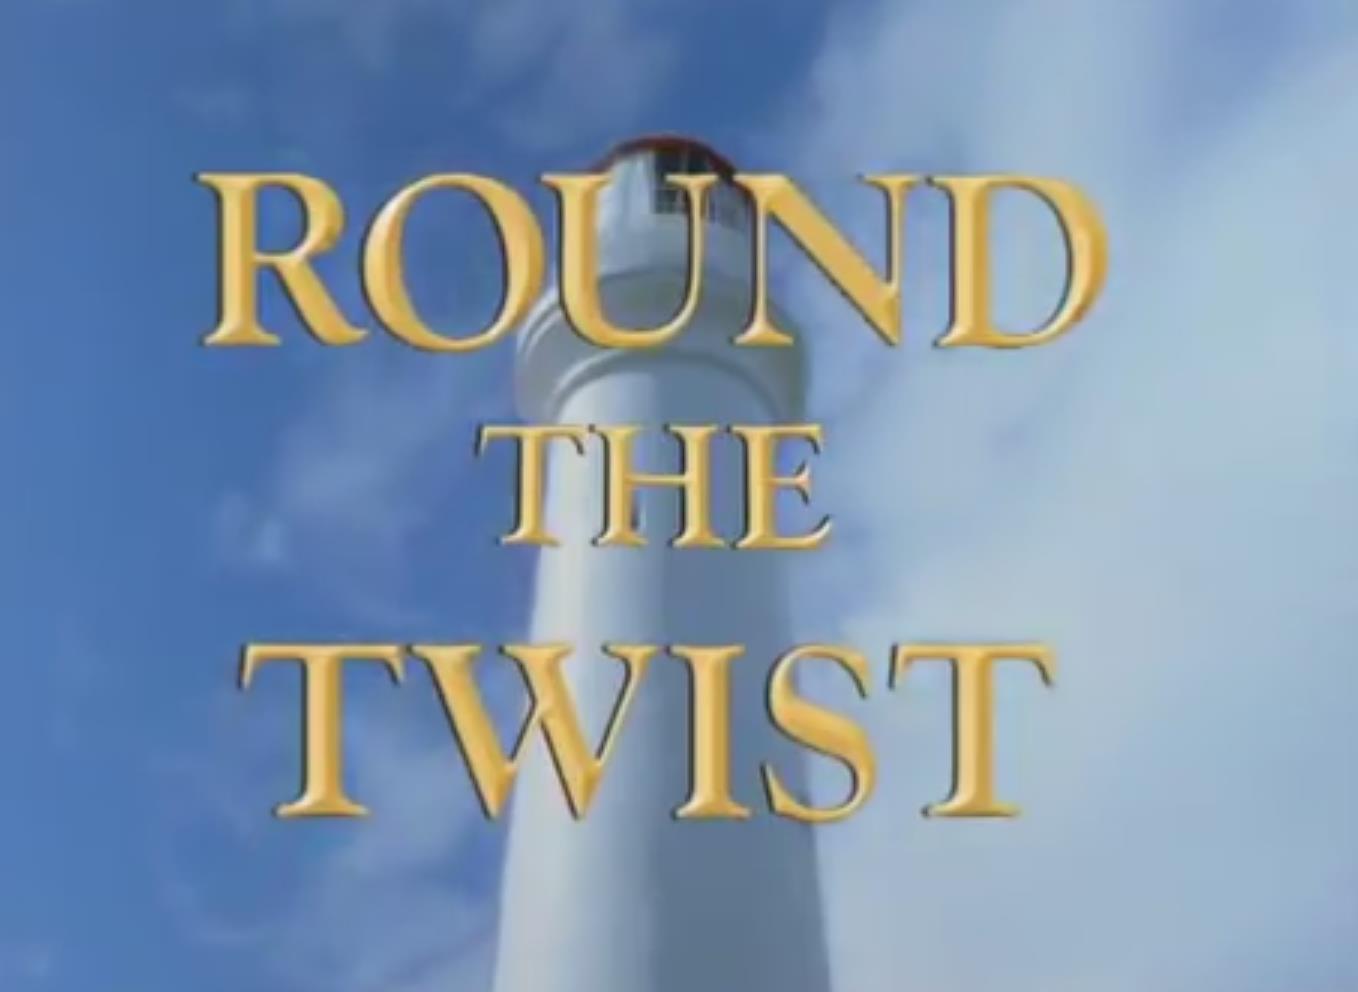 Old Cbbc Image Round The Twist HD Wallpaper And Background Photos